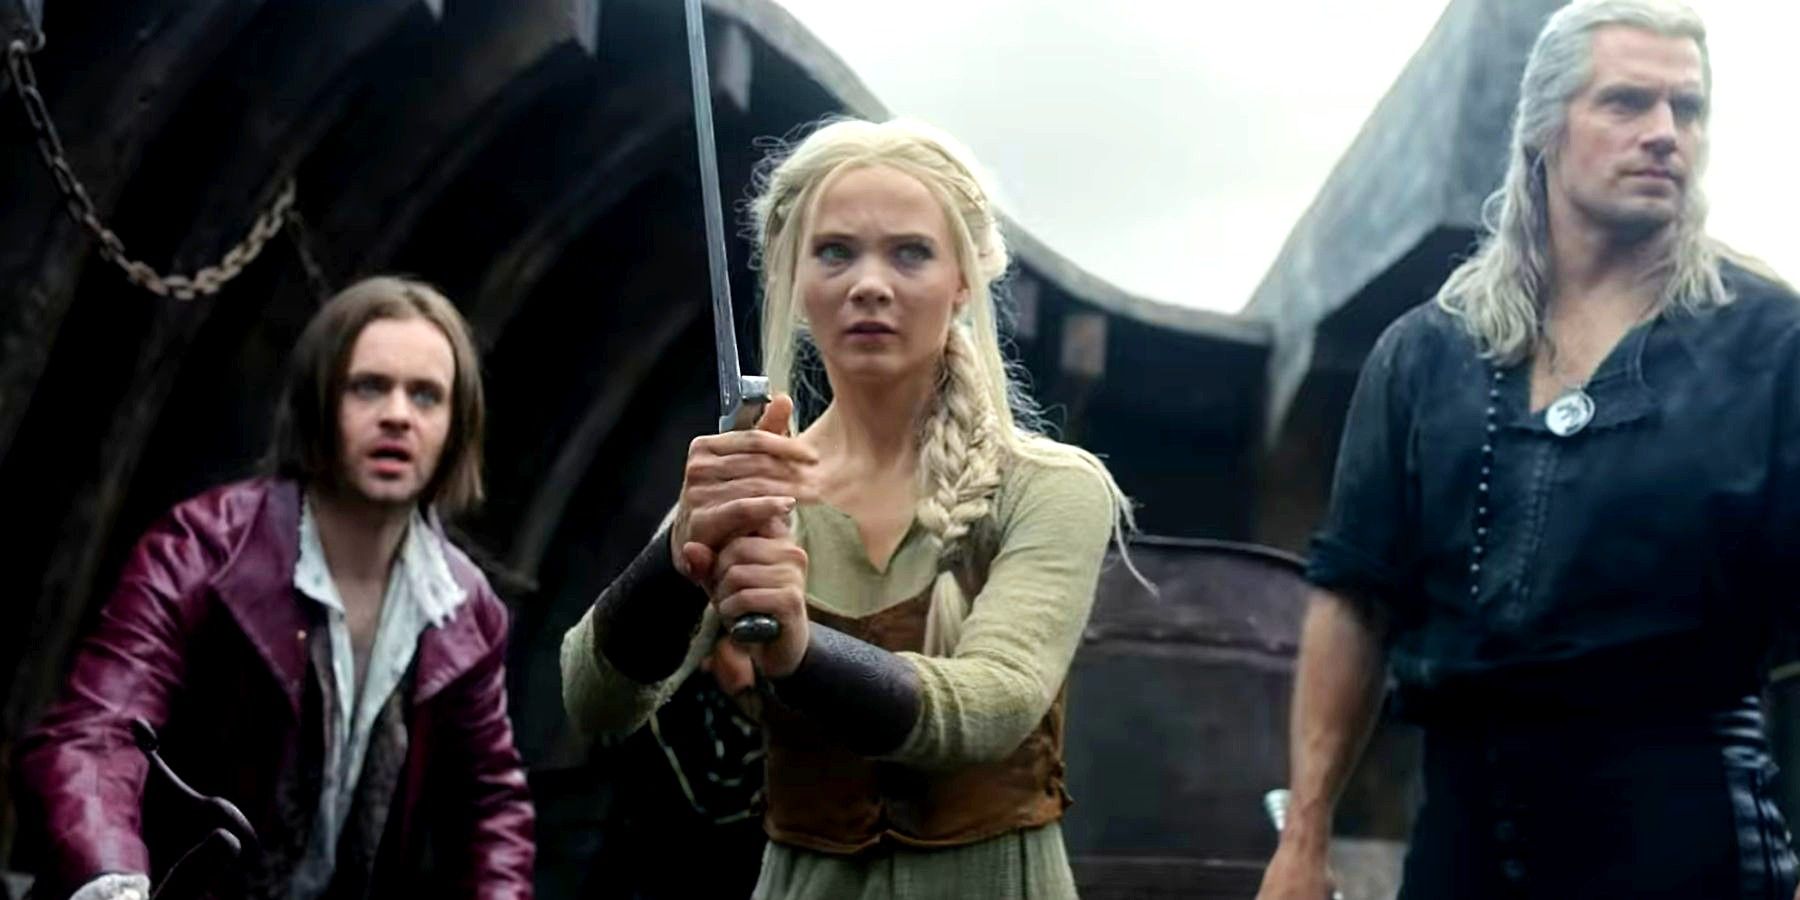 Ciri wielding a sword with Geralt and Jaskier behind her in The Witcher season 3